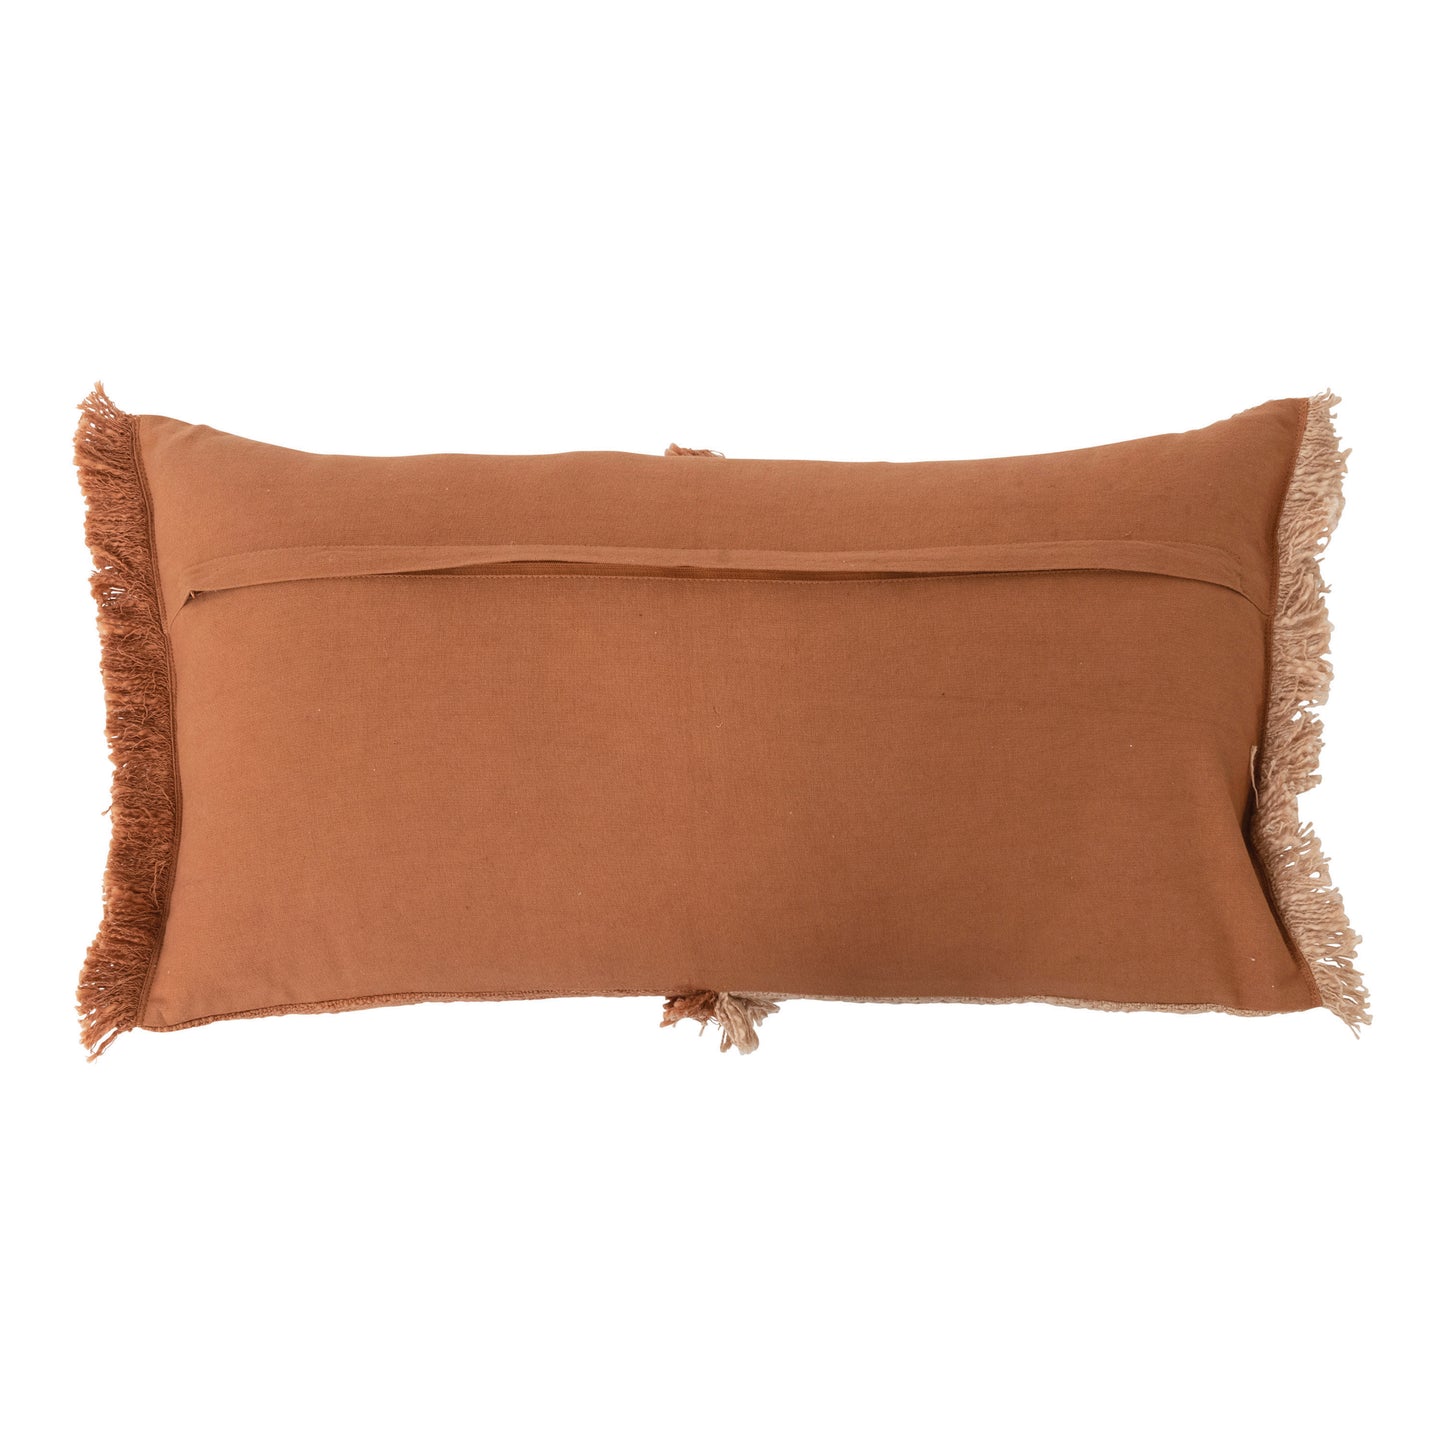 28" x 14" Woven Cotton Lumbar Pillow with Fringe